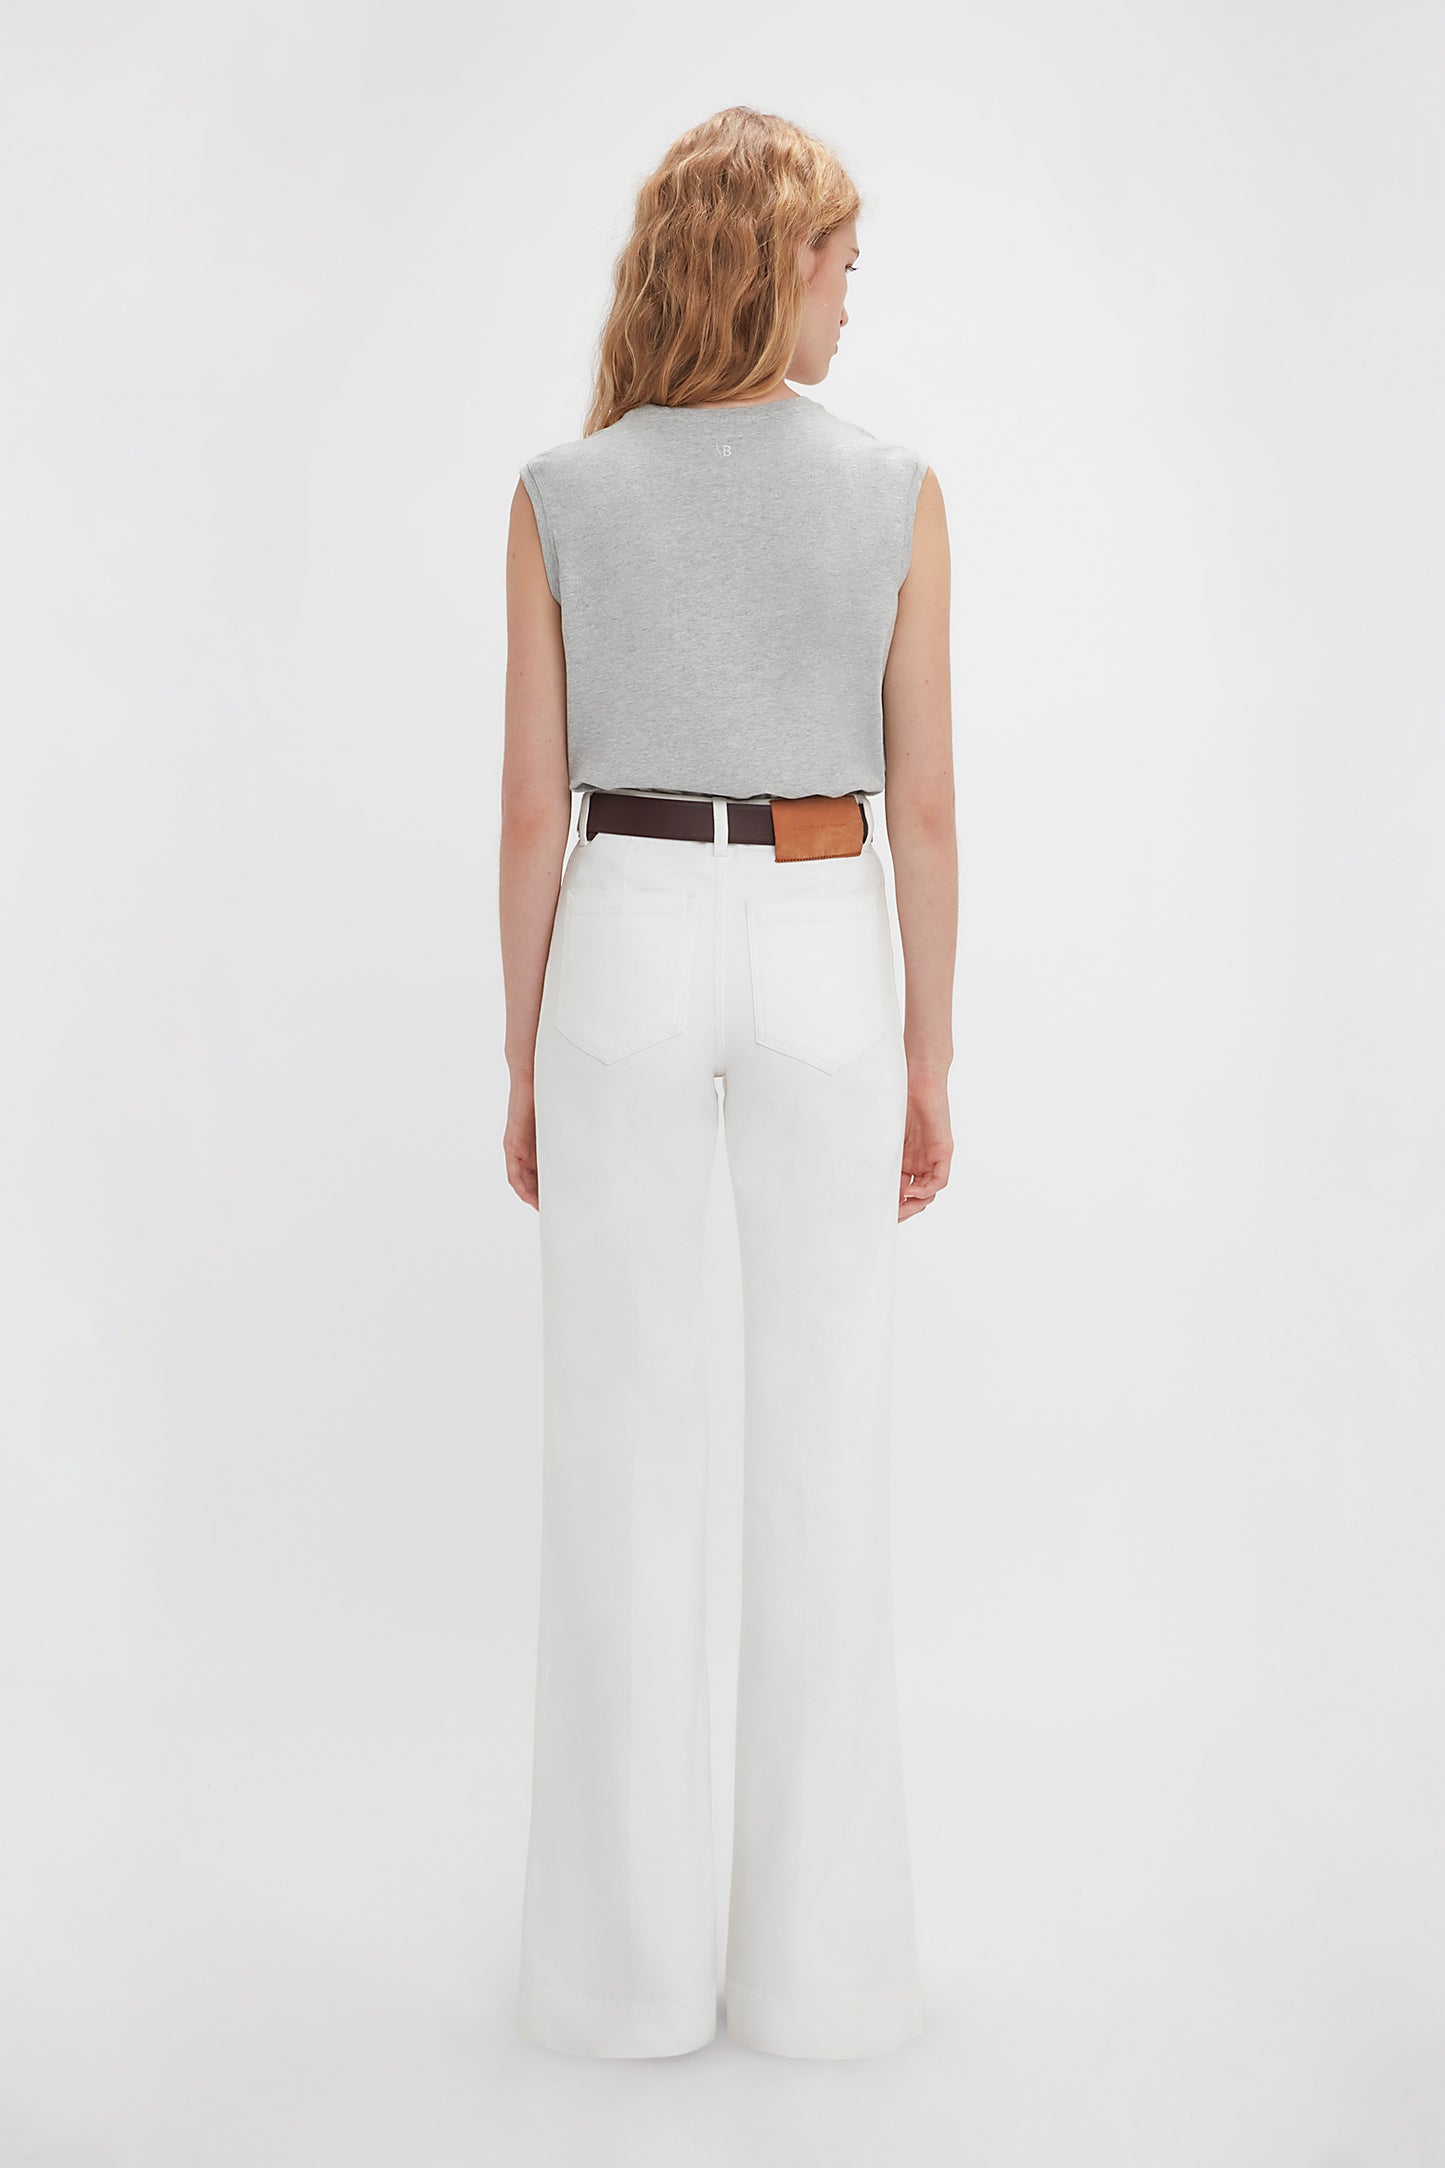 Woman viewed from behind wearing white wide-leg pants and a Victoria Beckham sleeveless t-shirt in grey marl, accessorized with a brown belt.